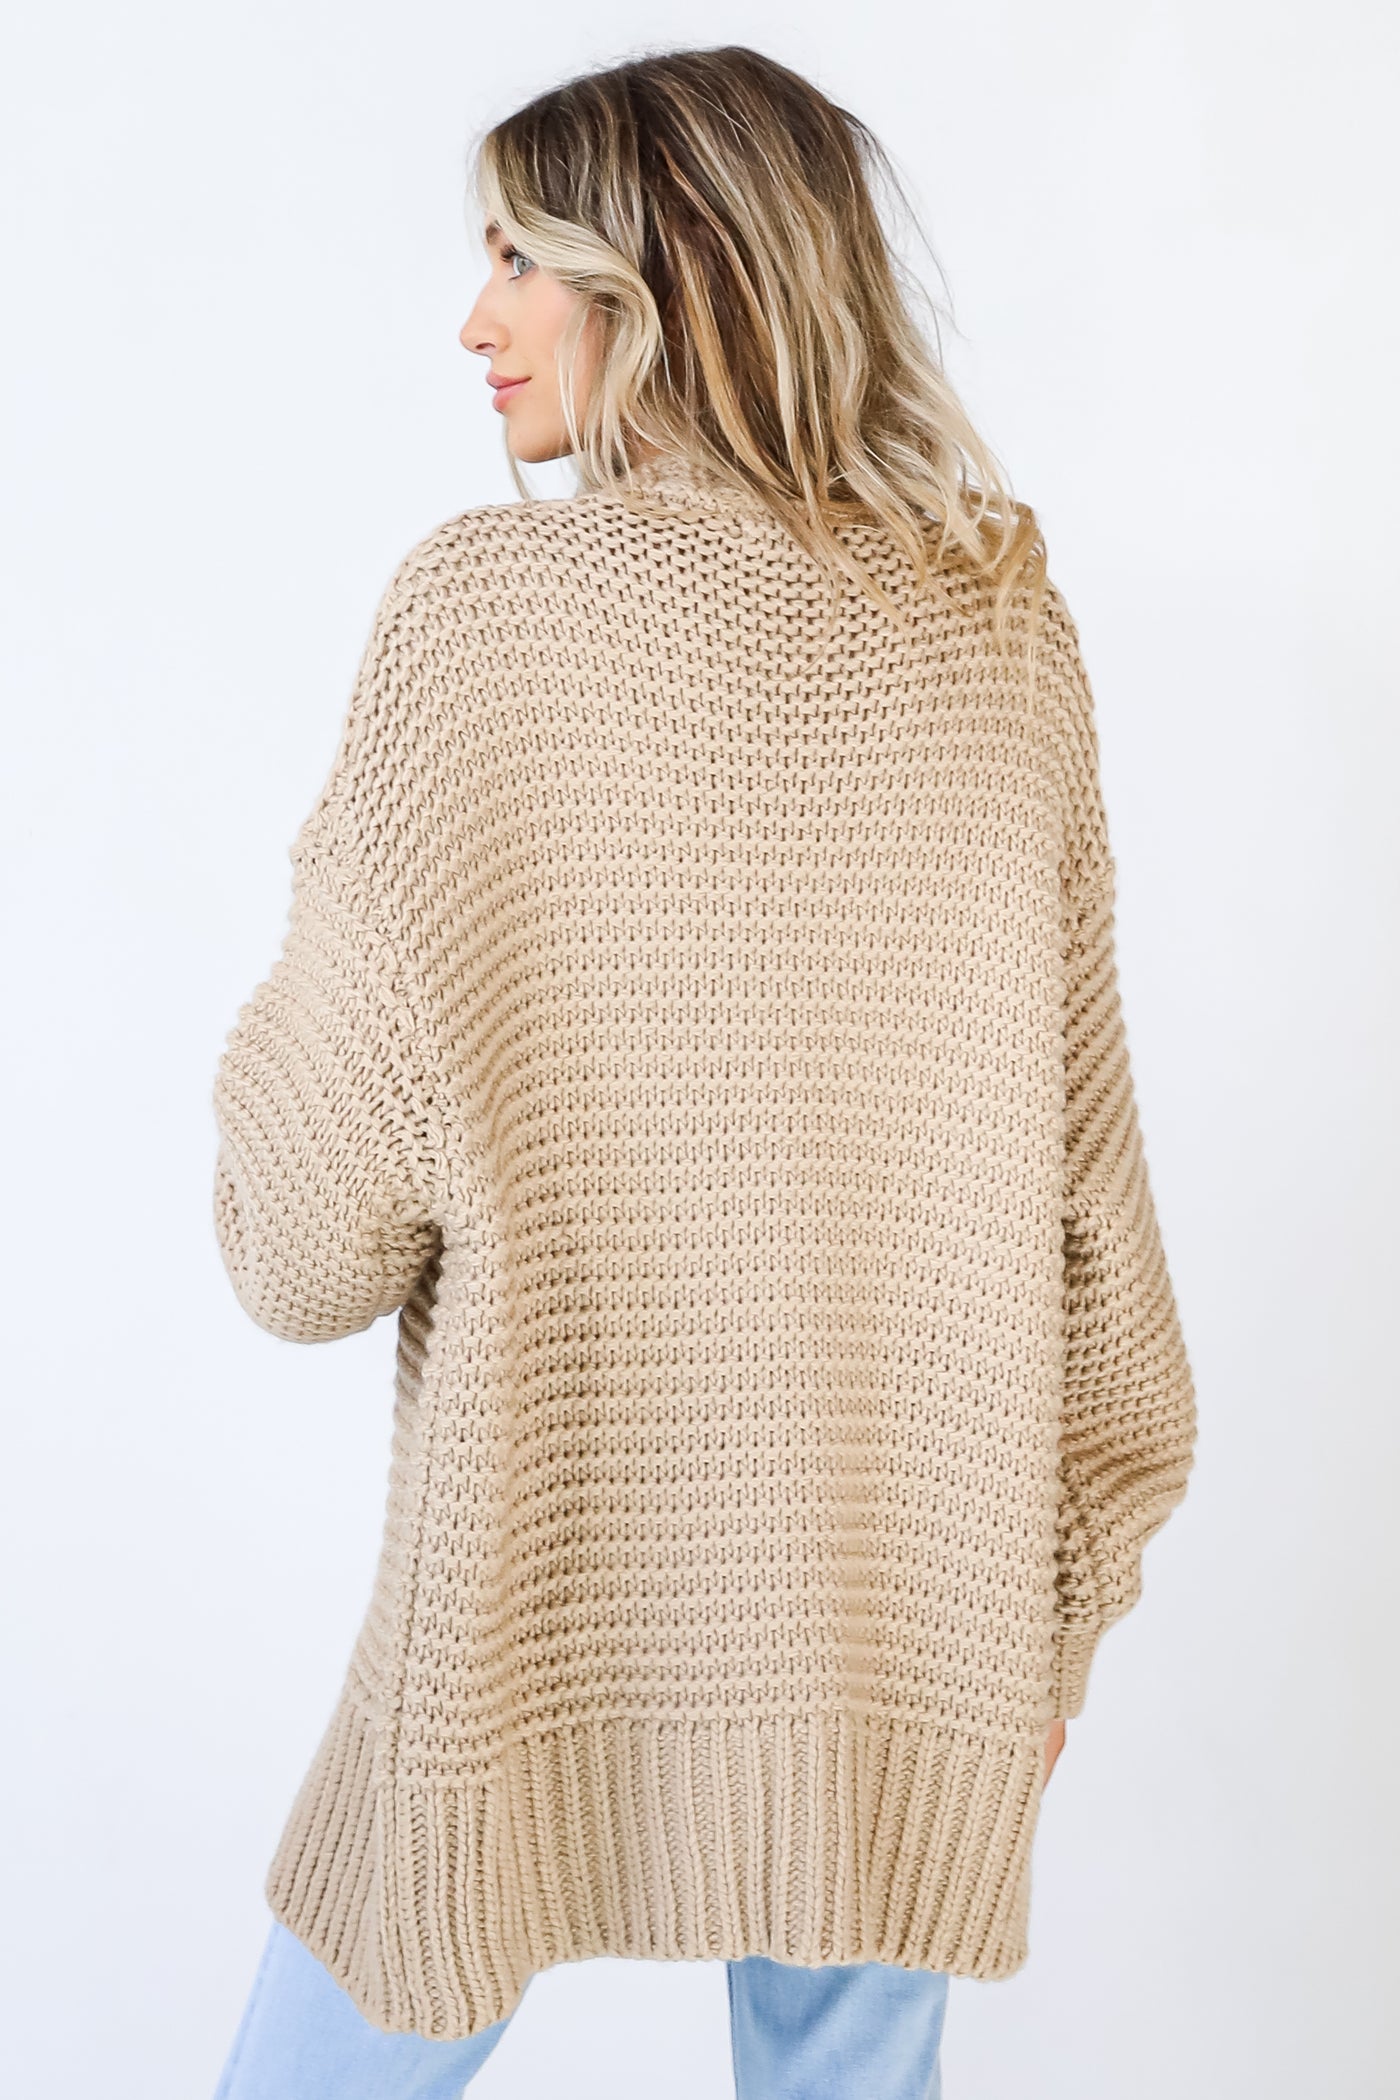 Sweater Cardigan back view